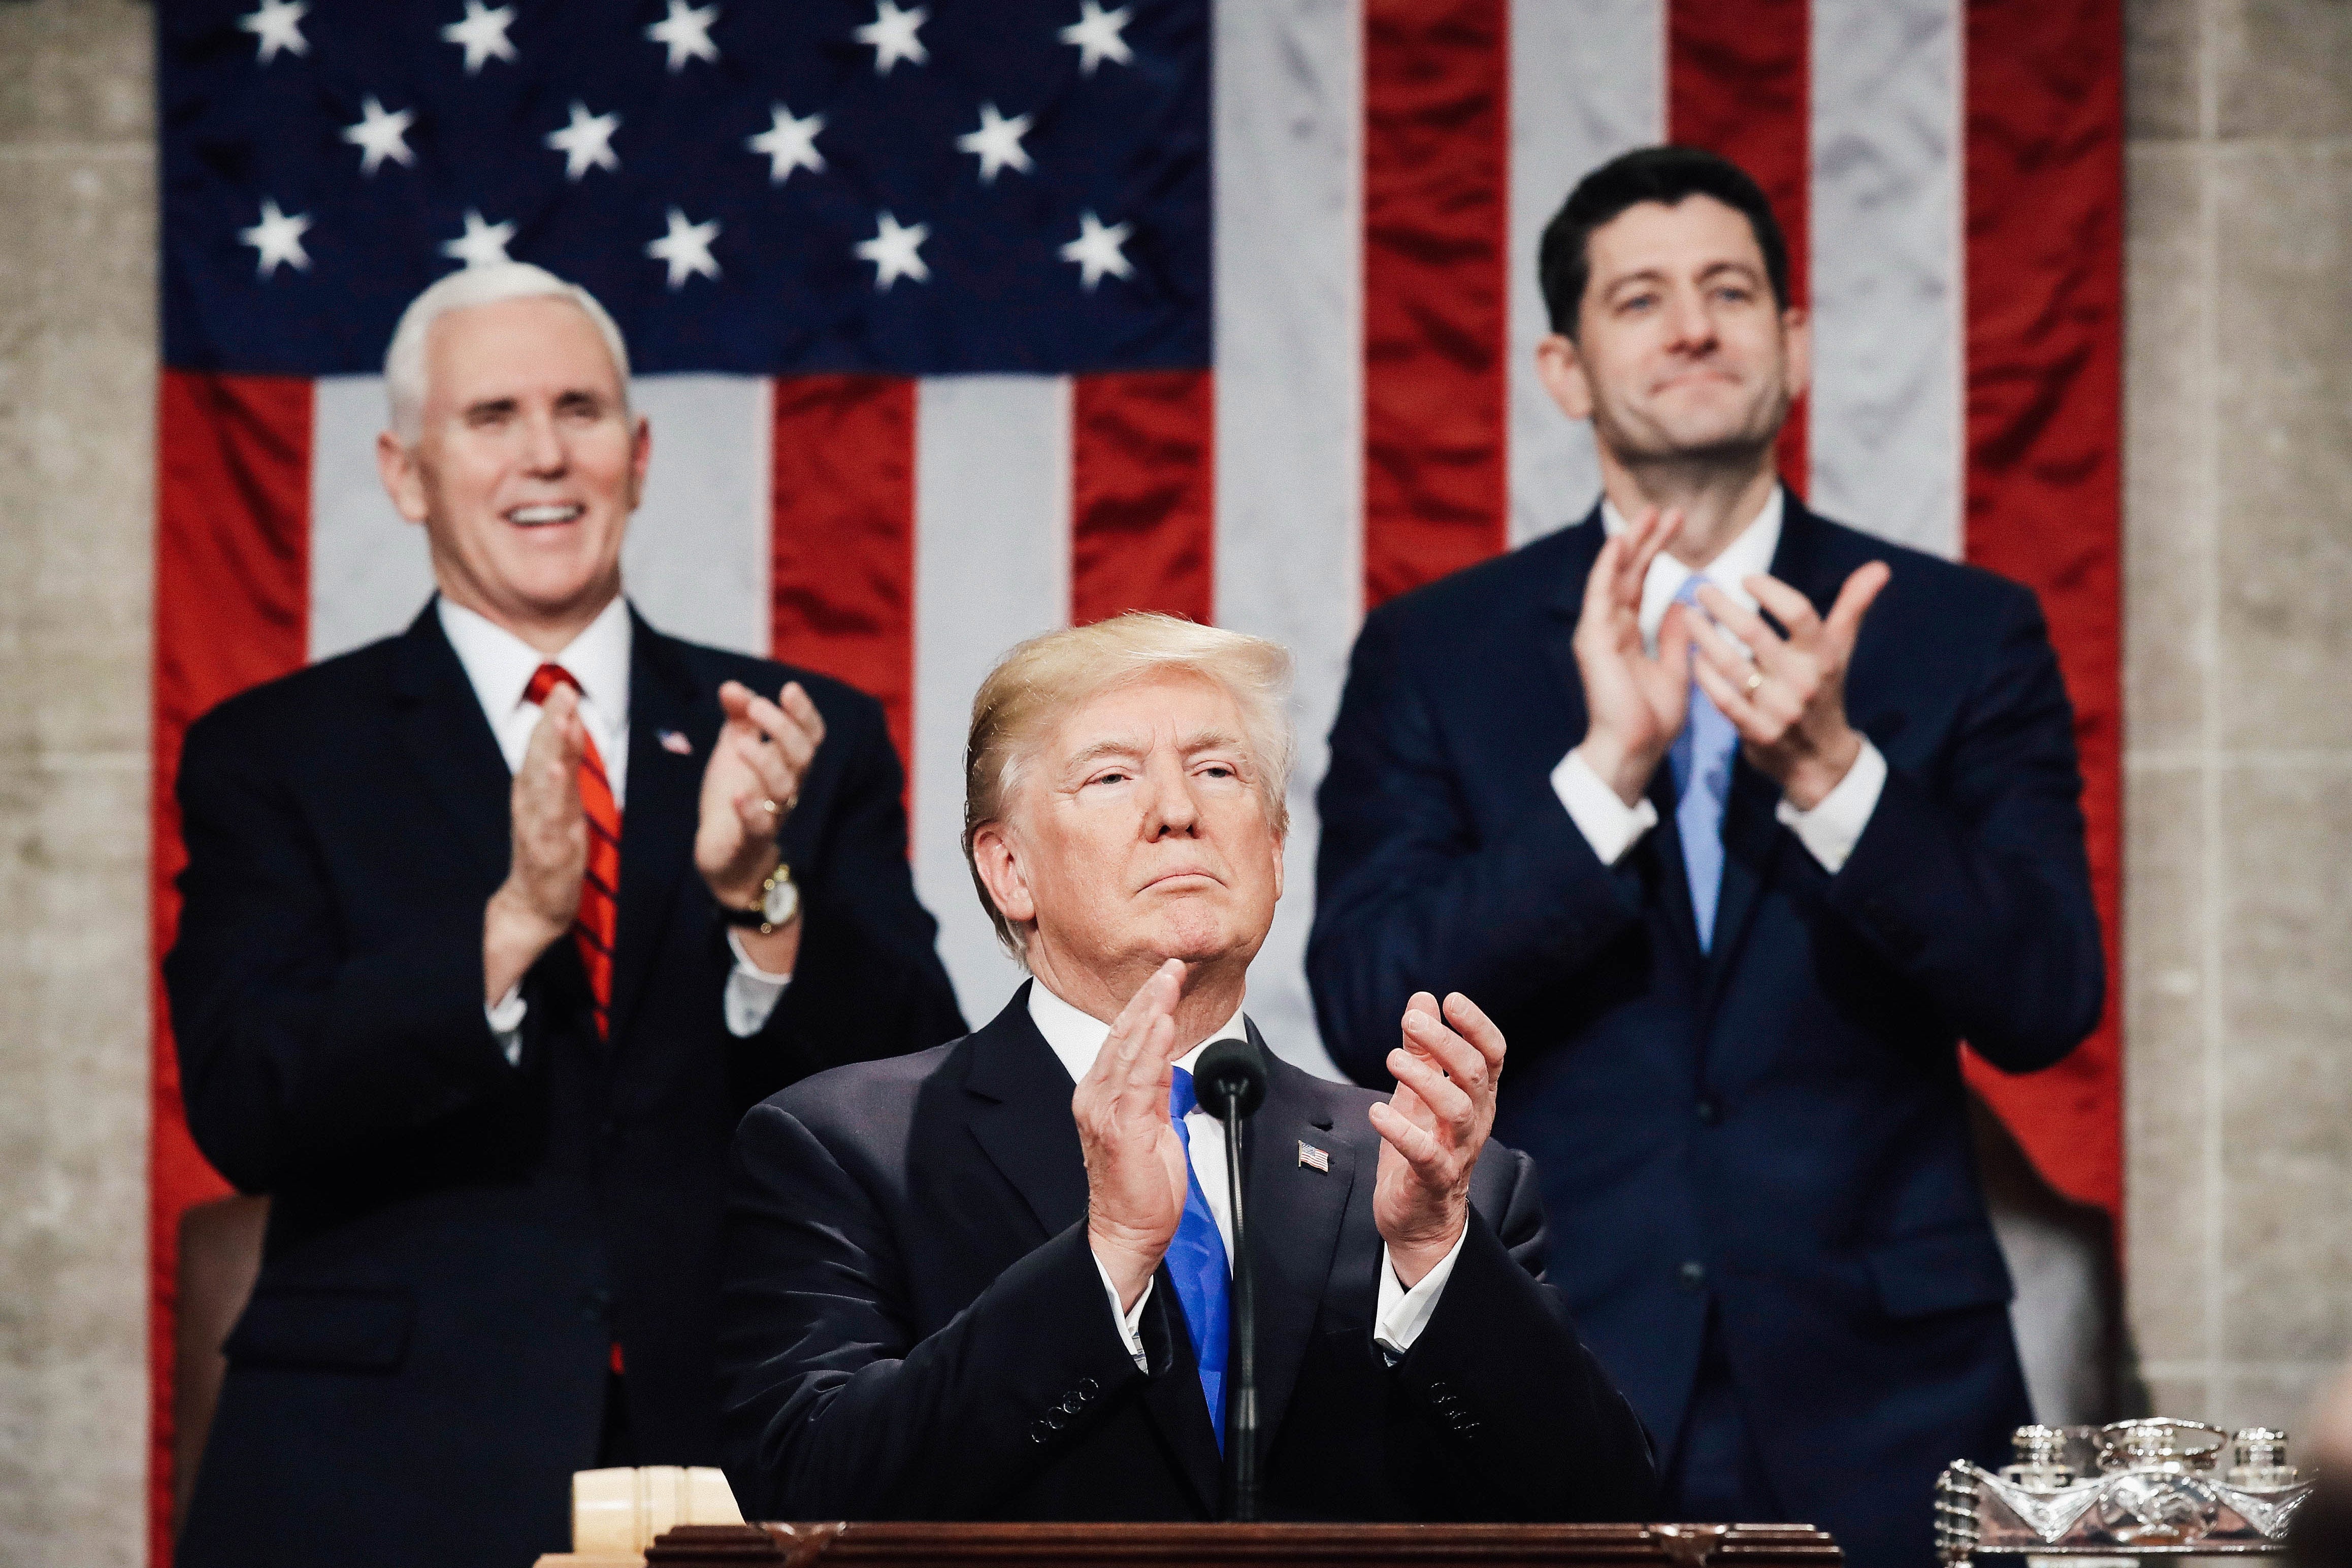 U.S. President Donald J. Trump claps along with U.S. Vice President Mike Pence (L) and Speaker of the House U.S. Rep. Paul Ryan (R-WI) (R) during the State of the Union address.